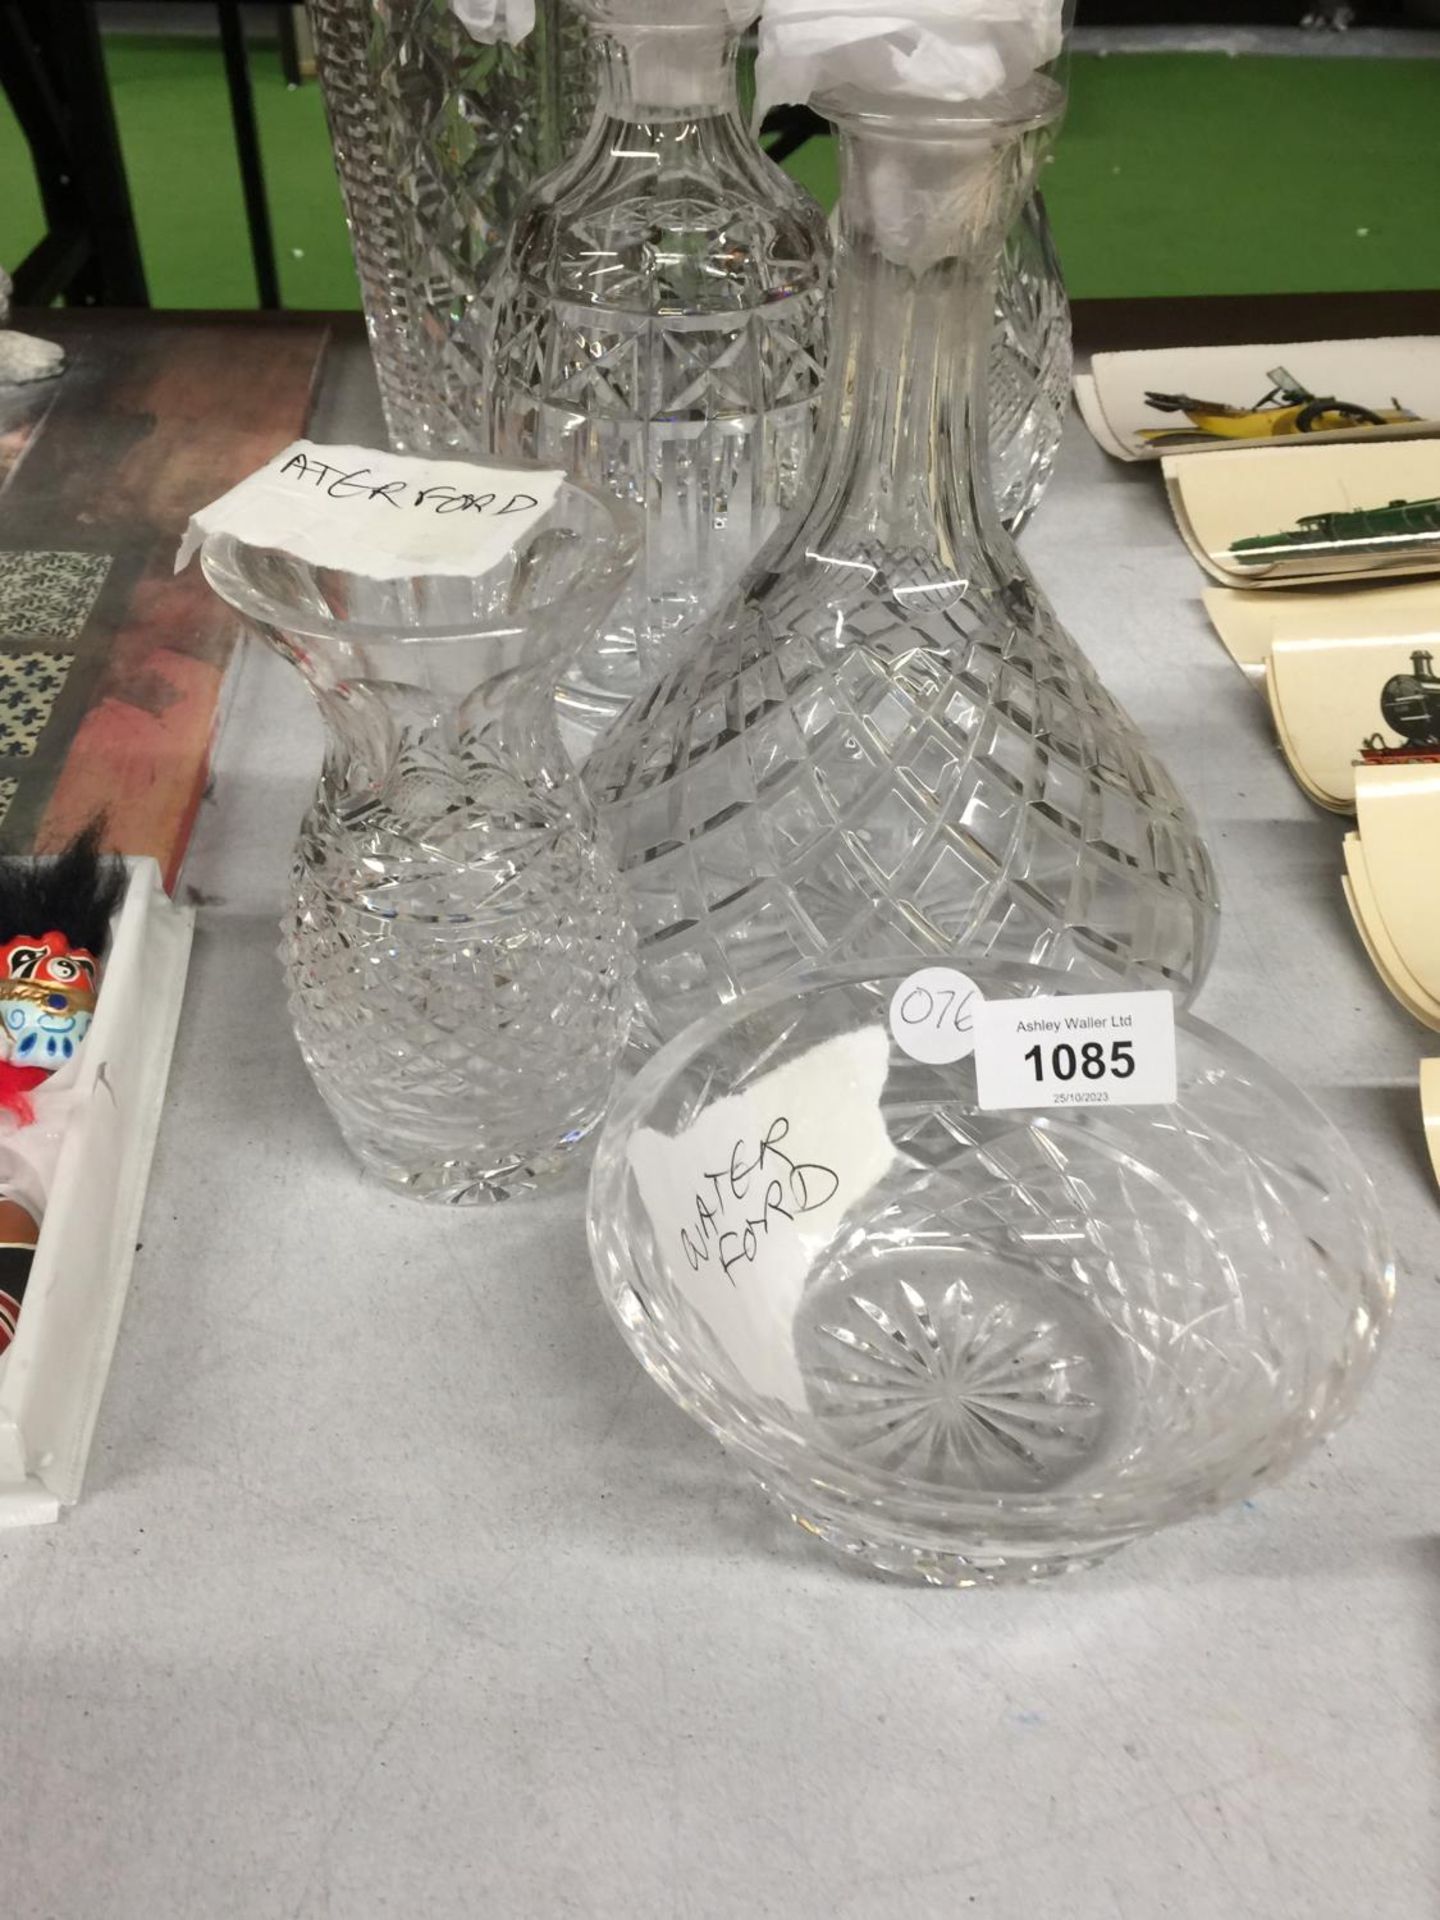 SIX PIECES OF WATERFORD CRYSTAL GLASS TO INCLUDE THREE DECANTERS, A LARGE AND SMALLER VASE AND A - Image 2 of 3